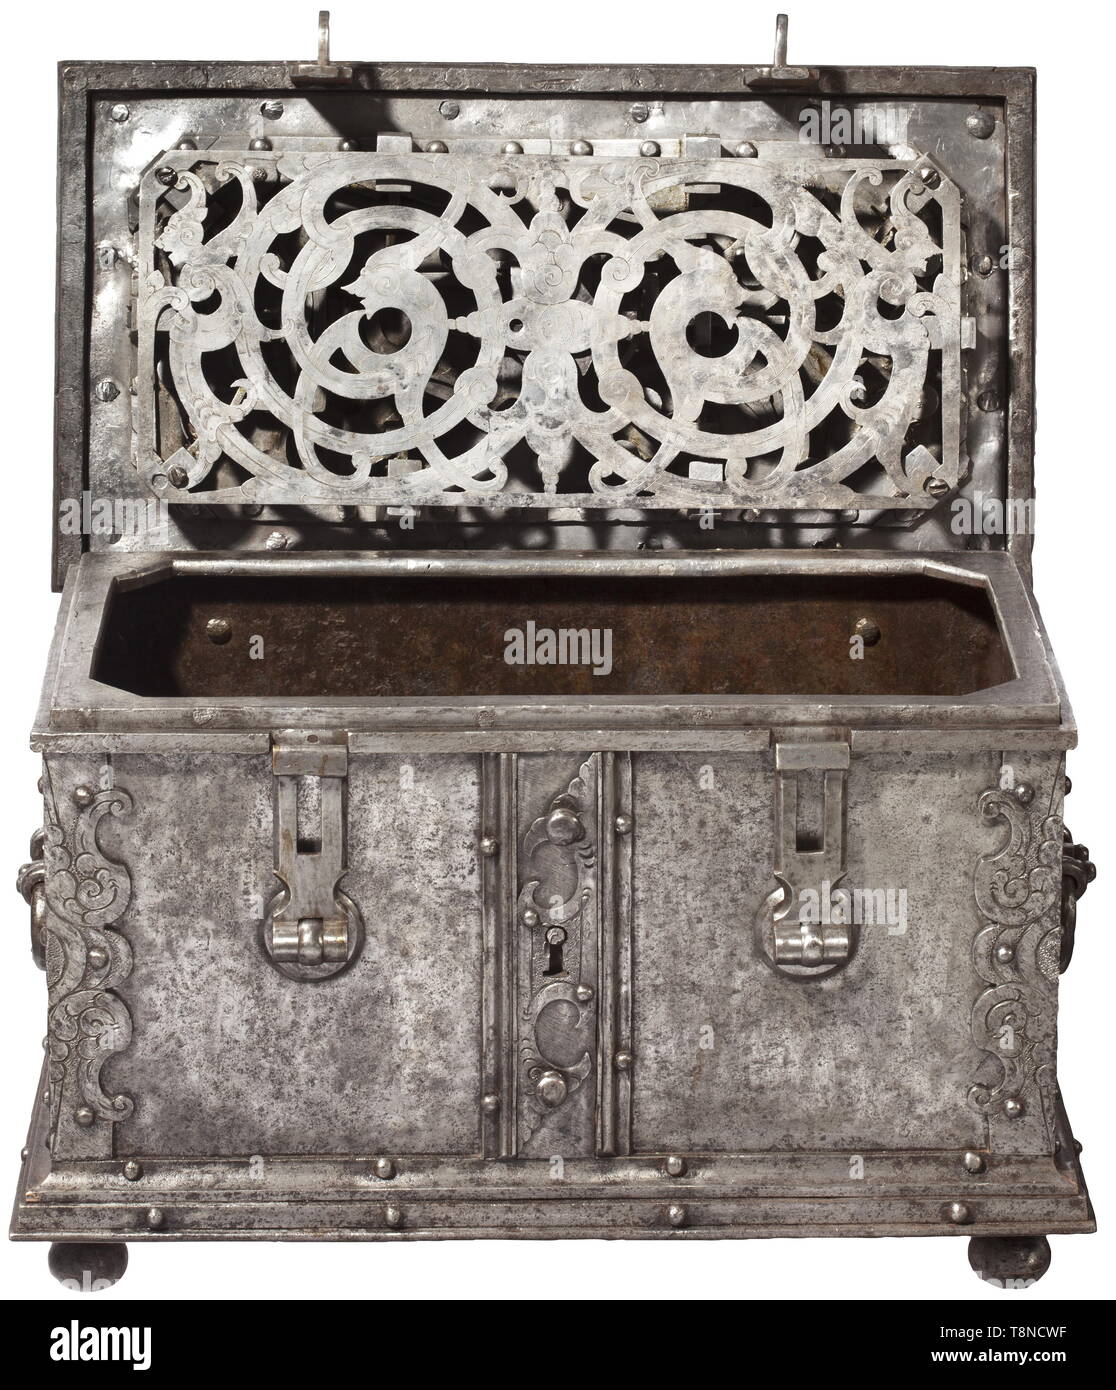 A heavy Southern German iron casket, presumably Nuremberg, circa 1620 Rectangular sheet iron body, reinforced edges with engraved and embossed decoration. Stepped base on four iron ball feet. False lock with curved escutcheon at the front, two hasps (partially replaced) with attached triangular locks (each one marked). The hinged lid with heavily reinforced edges. The cover of the central keyhole with hidden locking and spring-loaded lid. The inside with elaborate locking mechanism with tenfold locking. Replaced hollow shank key. Lavish openwork , Additional-Rights-Clearance-Info-Not-Available Stock Photo